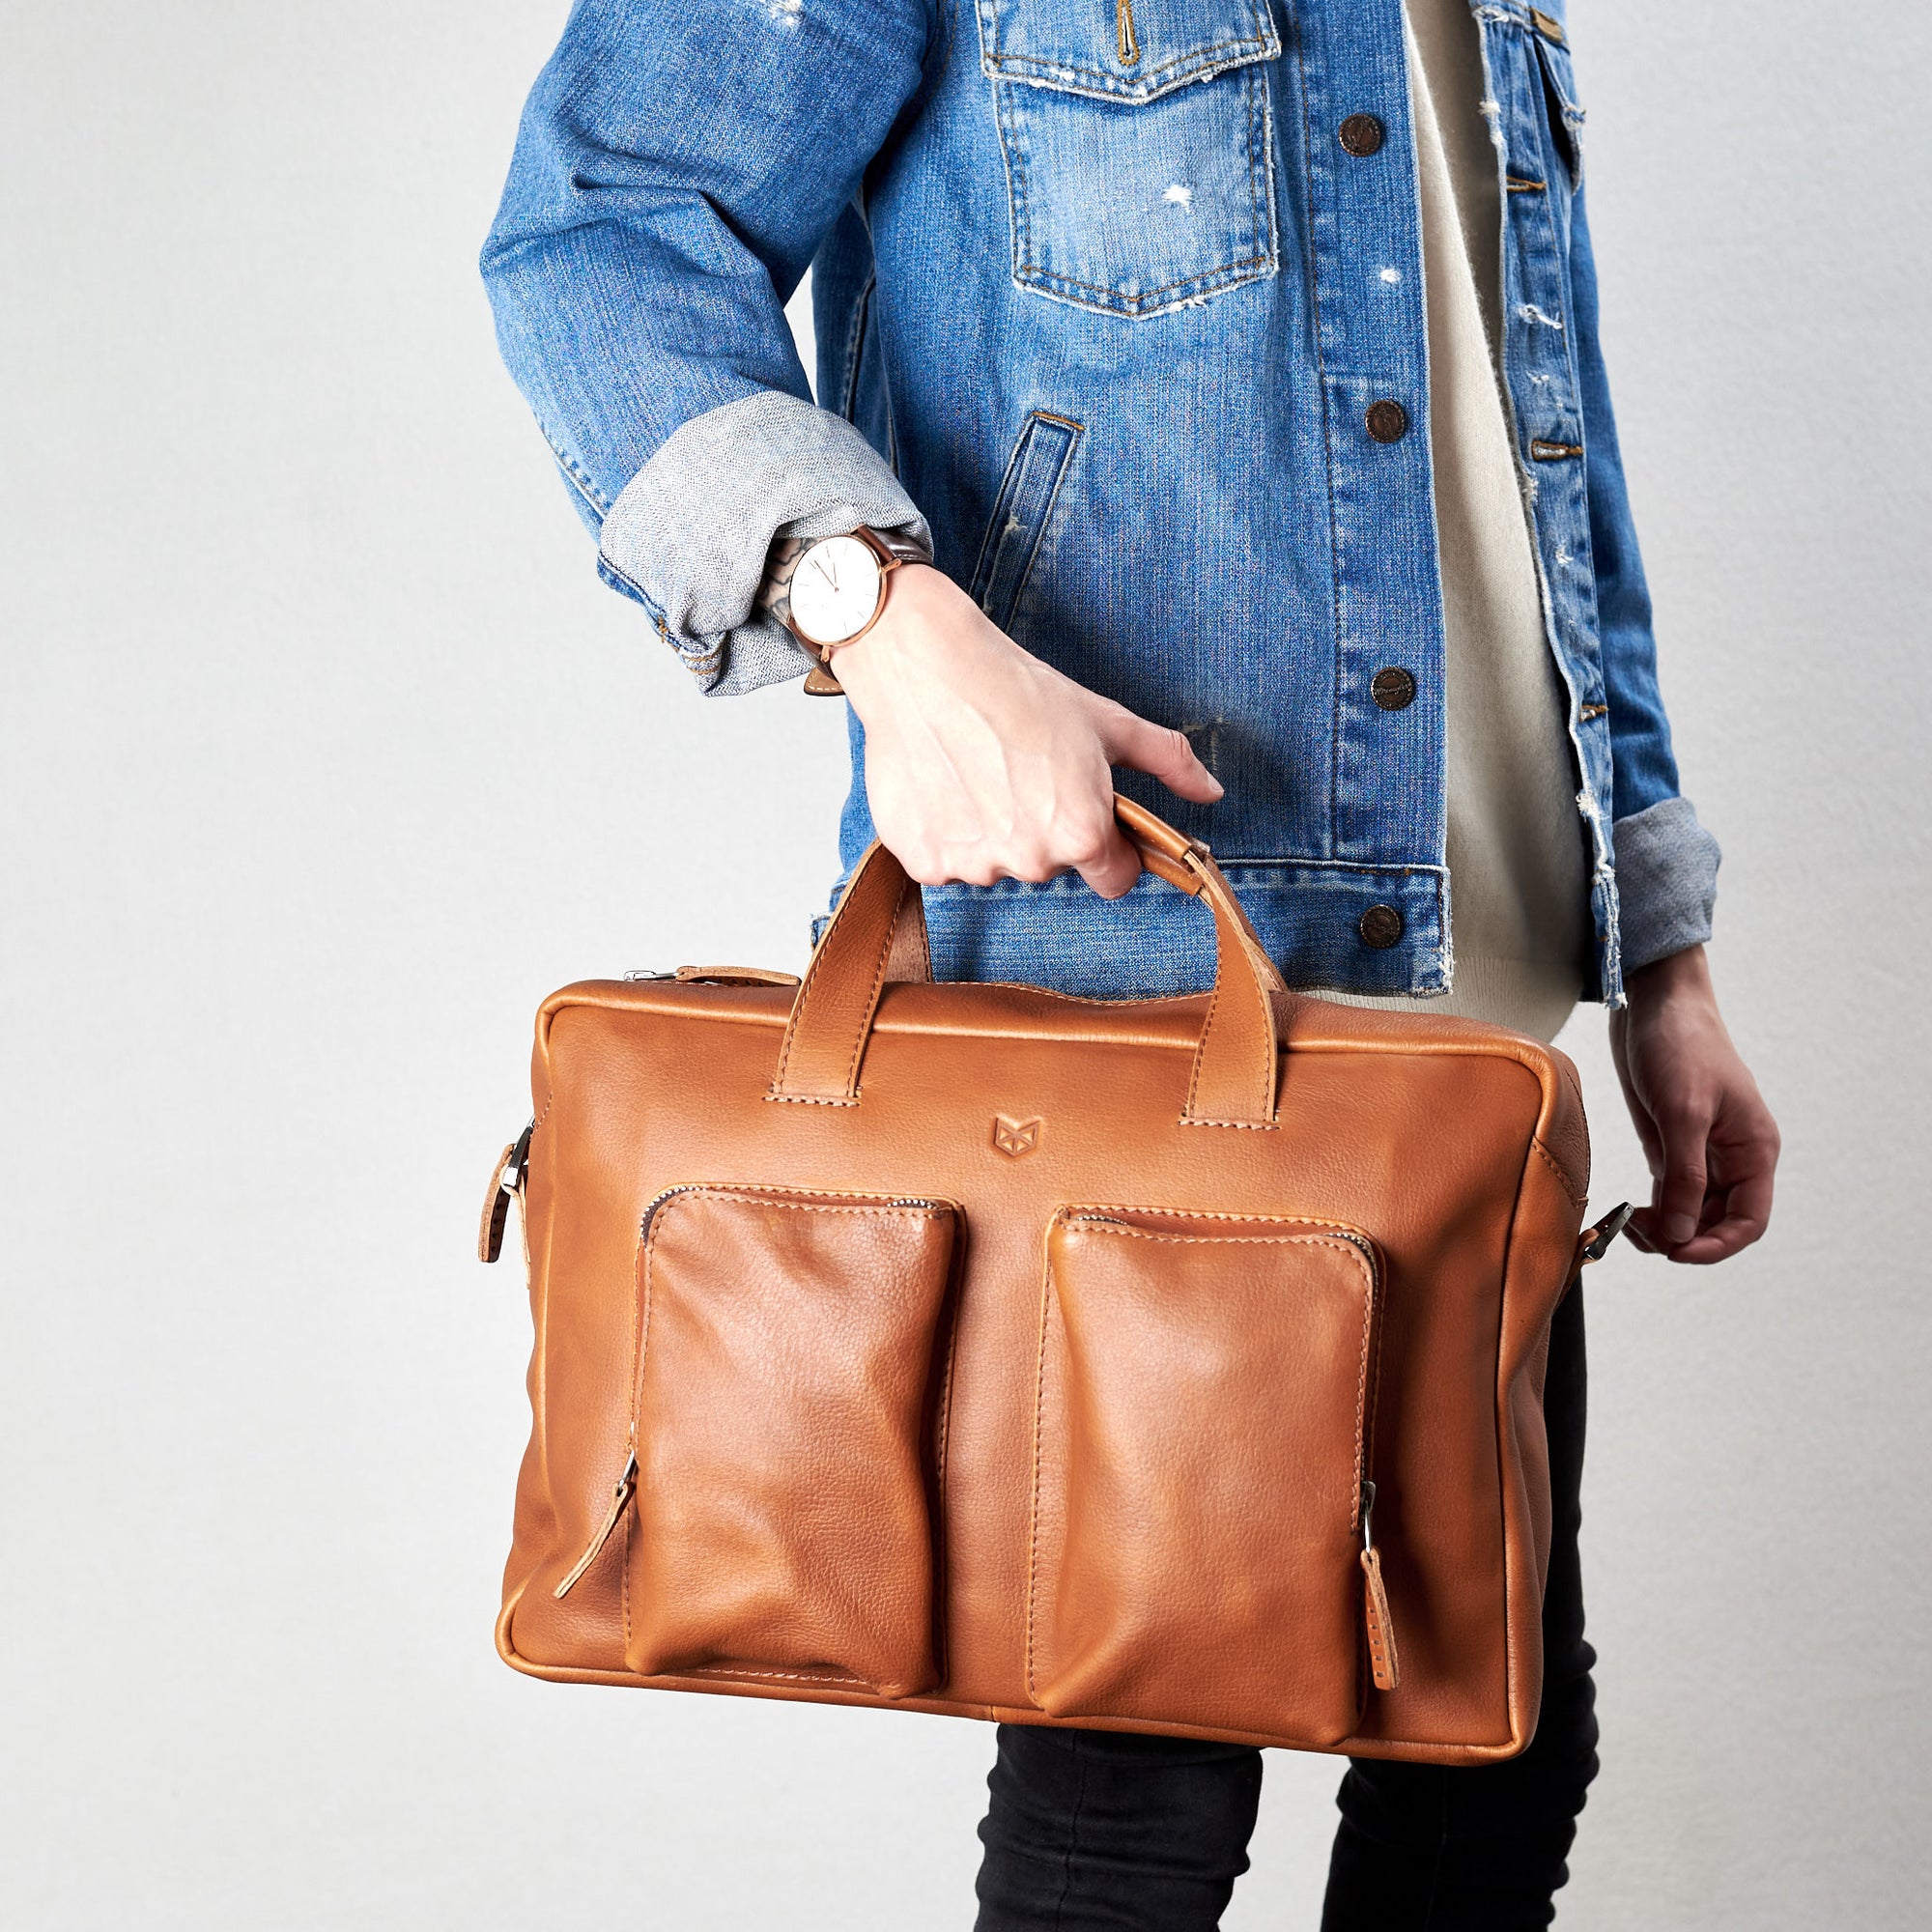 Style handles in use. Tan Equz messenger bag by Capra Leather. 